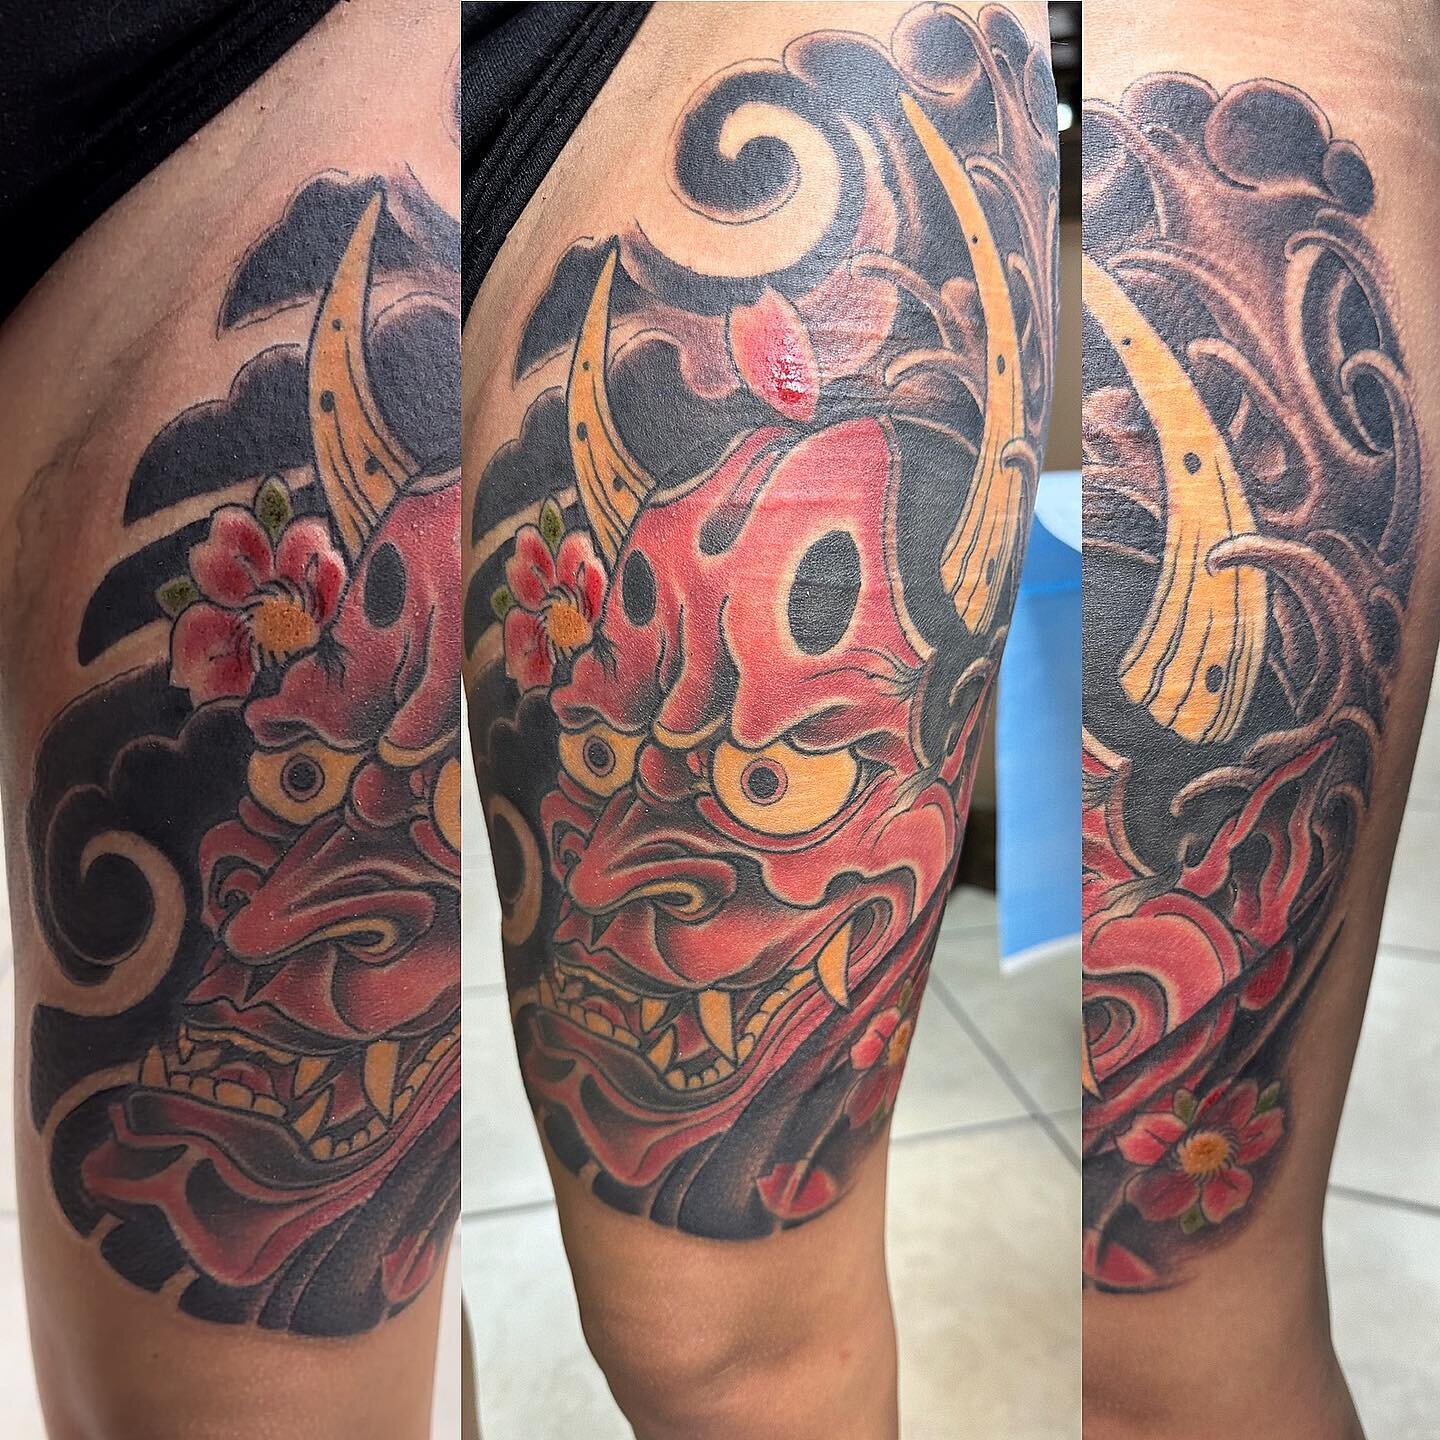 Hannya thigh finished for now with background addition #tattoo #art